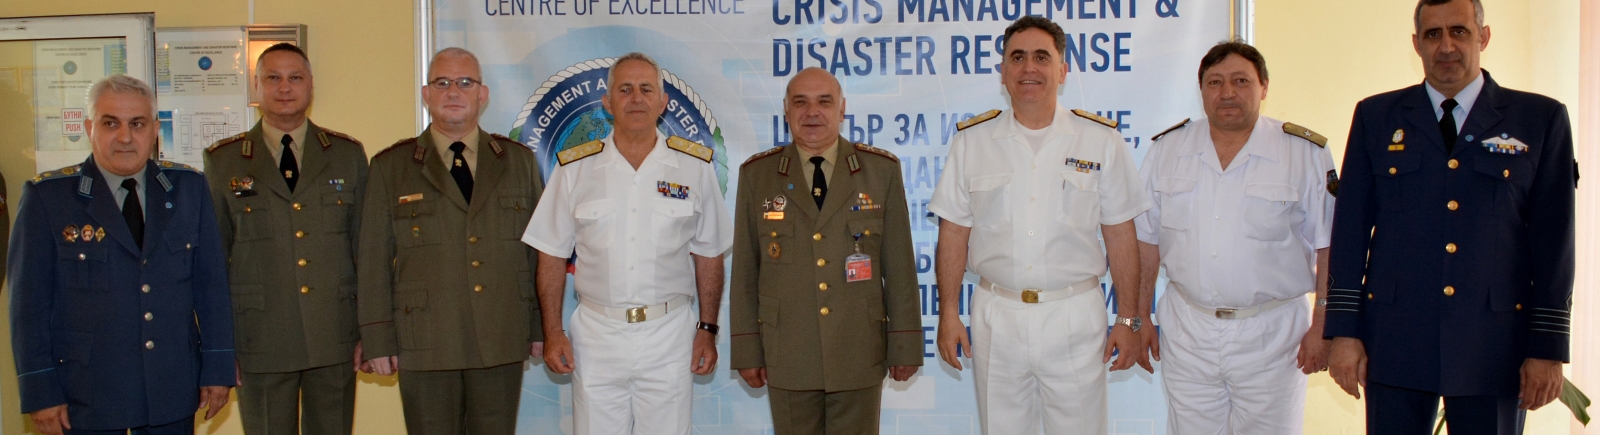 Visit of the Chief of the Hellenic National Defence General Staff - Admiral Evangelos Apostolakis